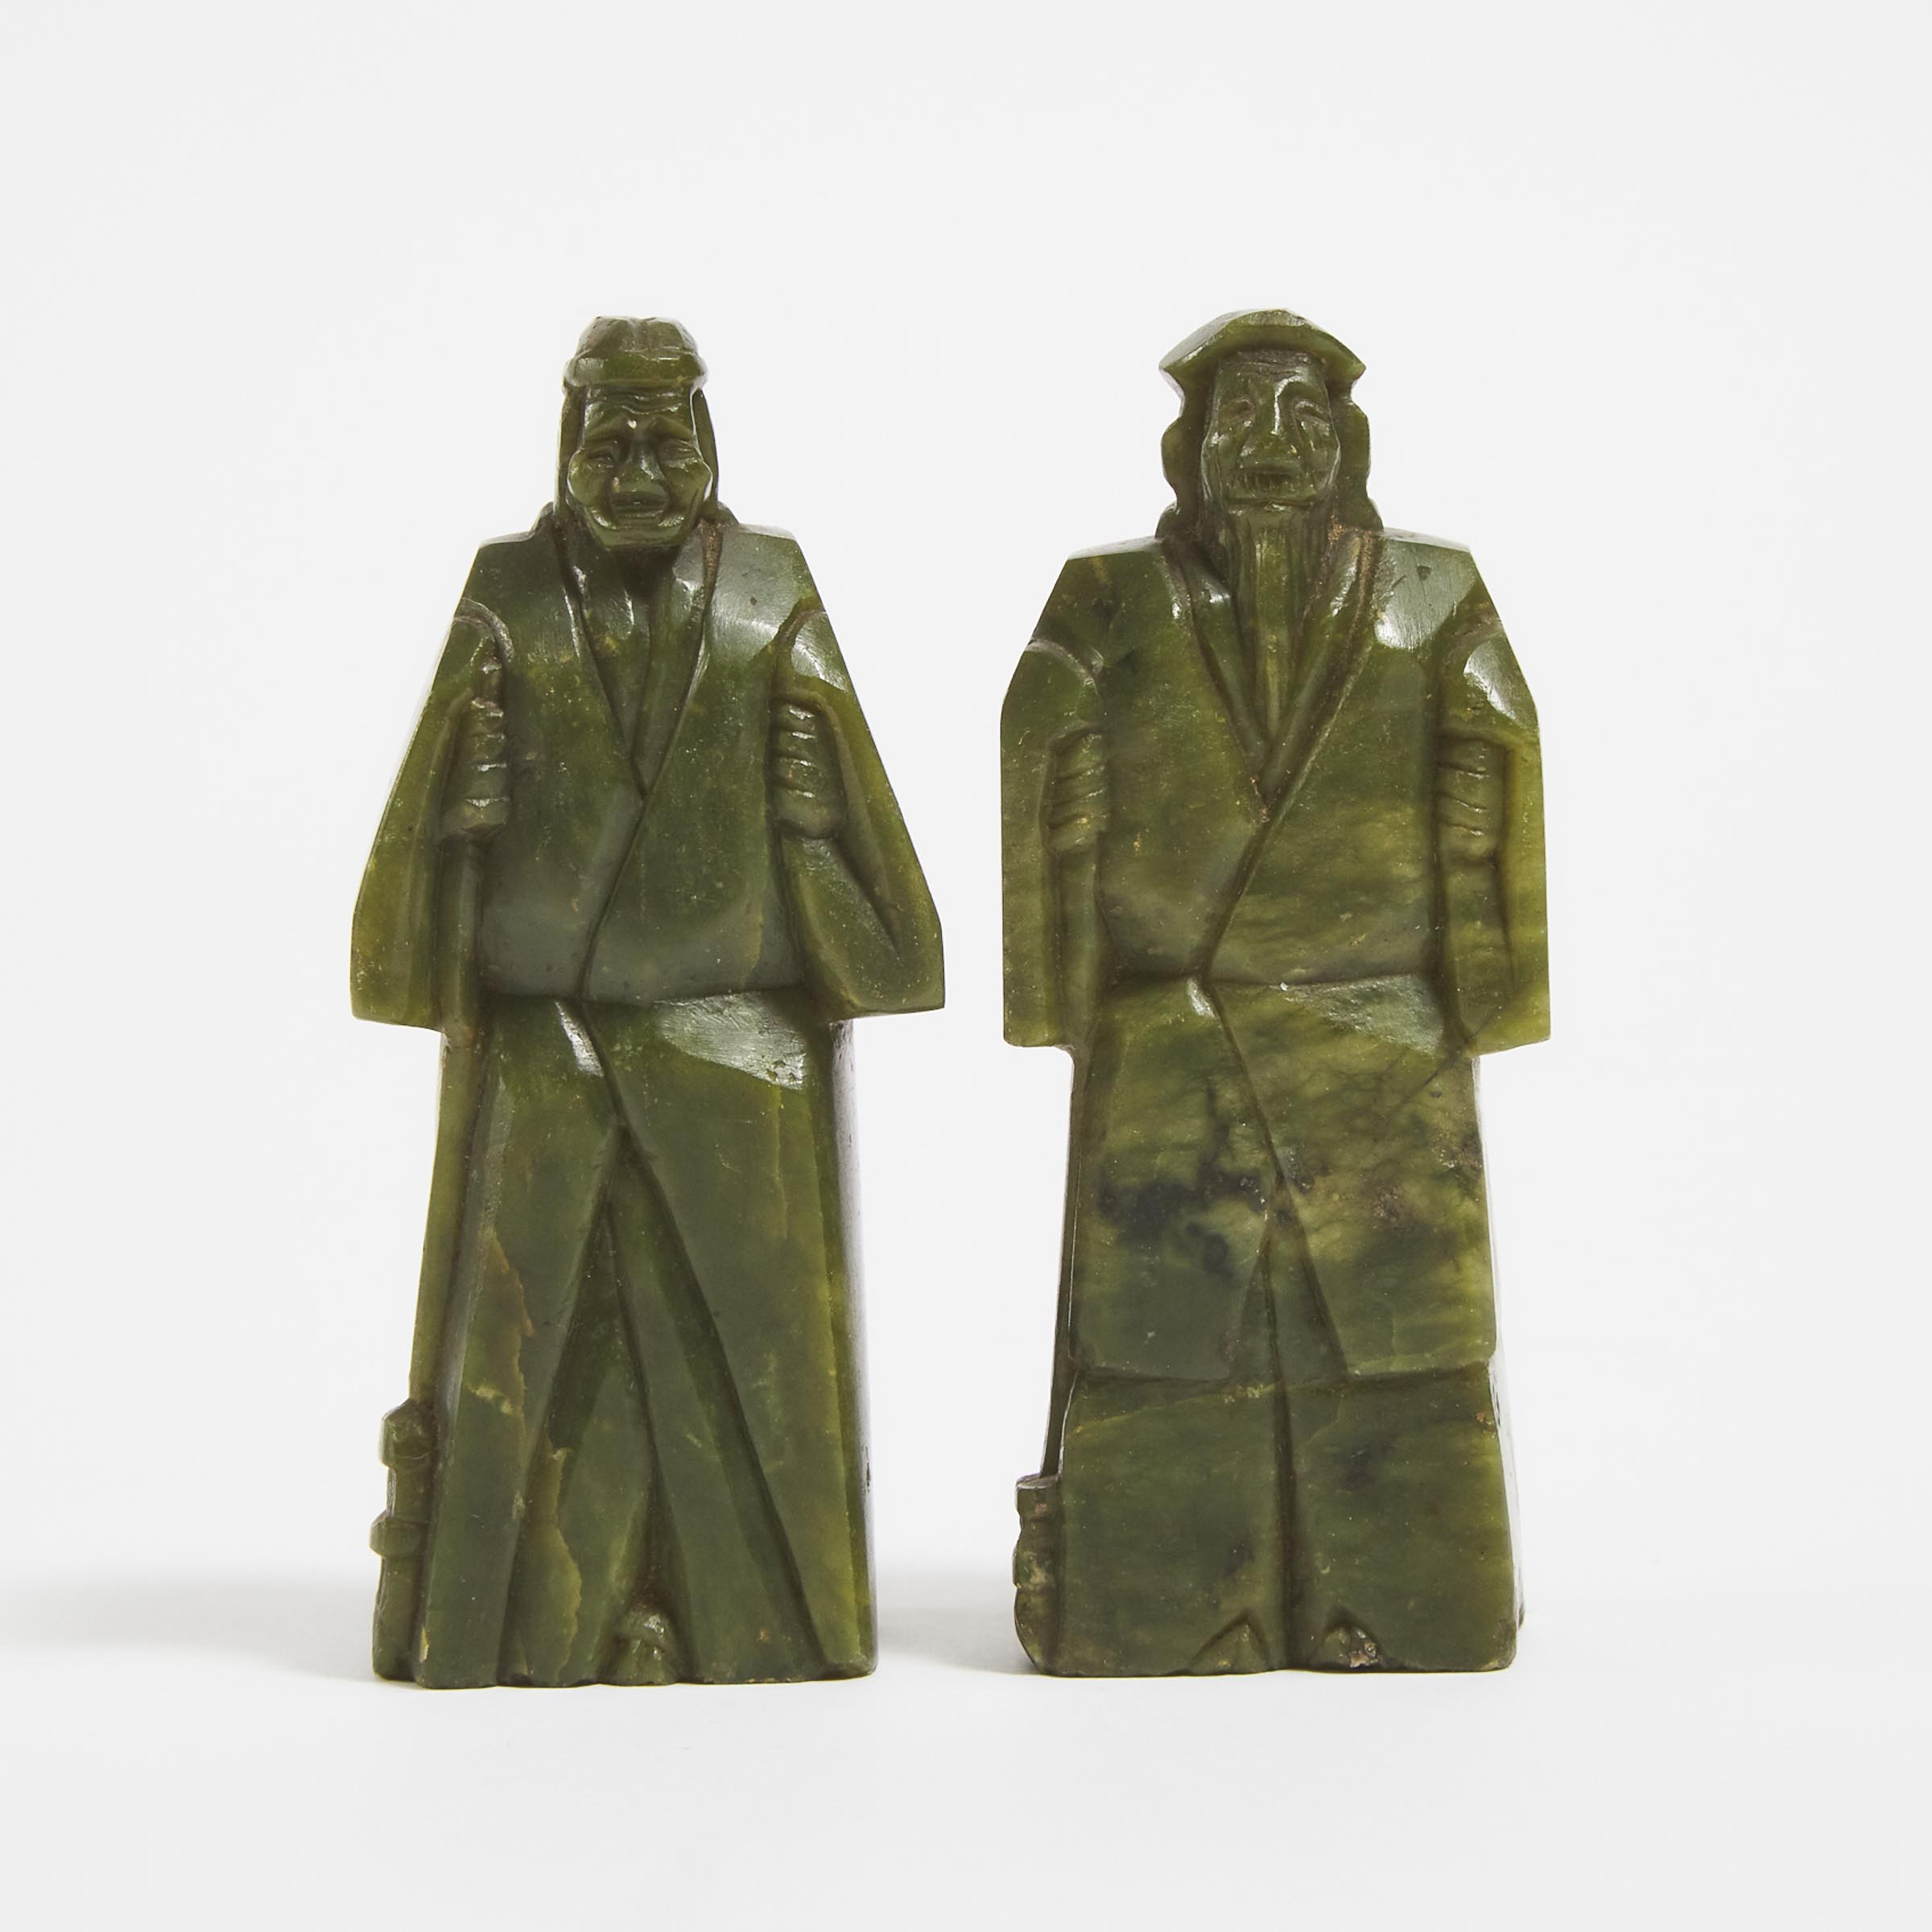 A Pair of Green Jade Figures of an Elderly Couple, Early 20th Century